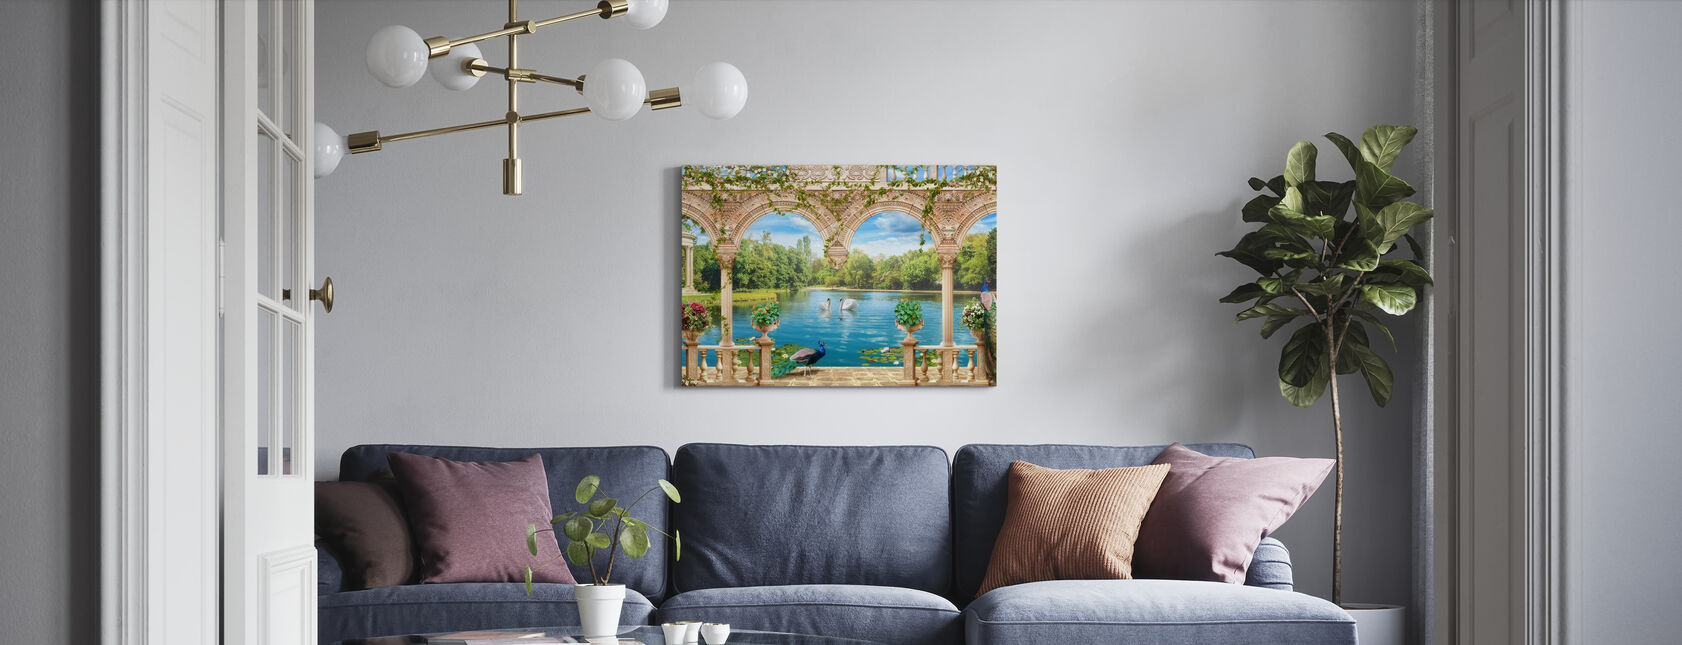 Swans in Park - Canvas print - Living Room